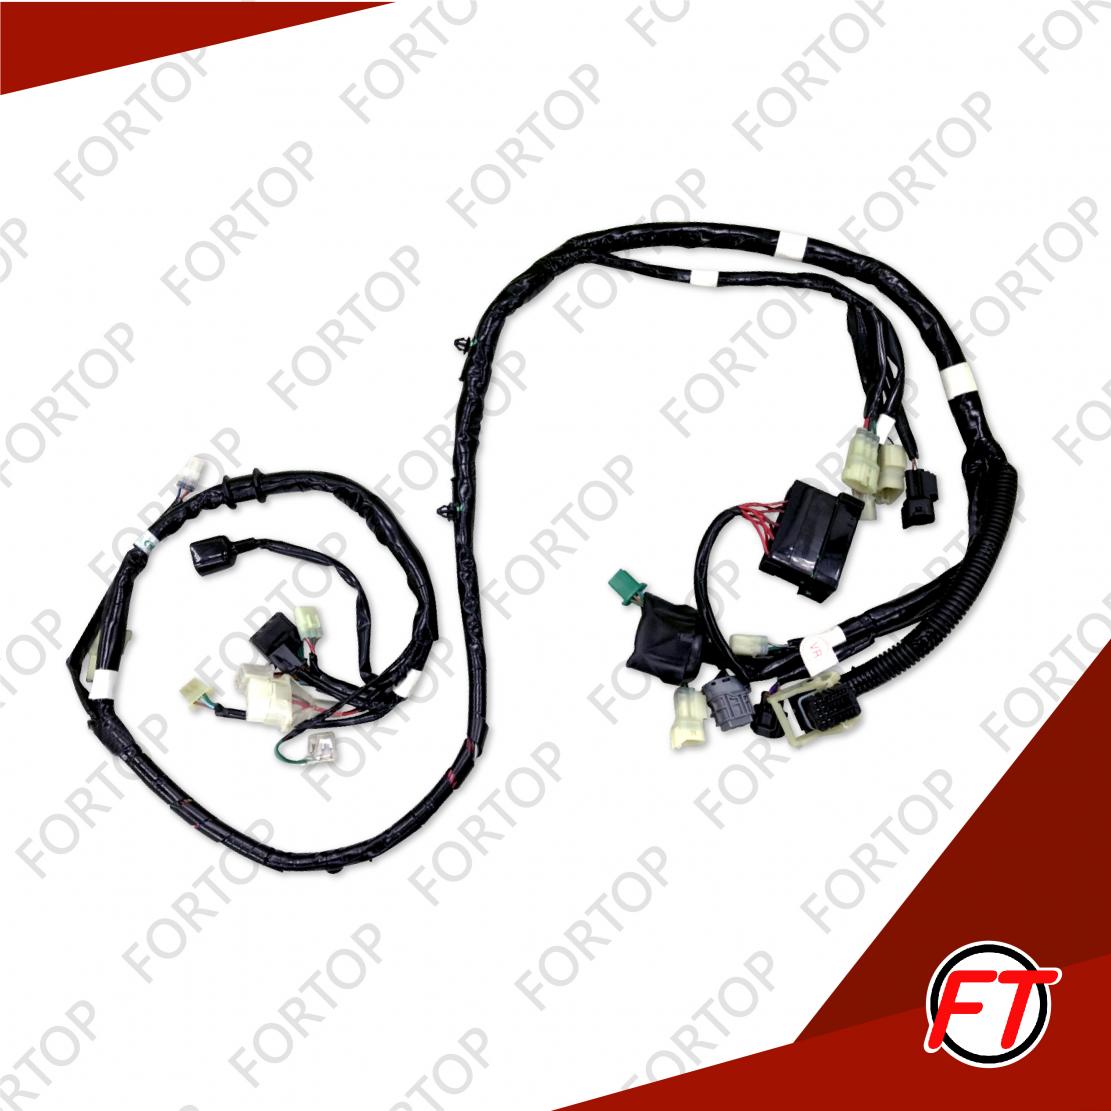 Wiring harness for electric scooters